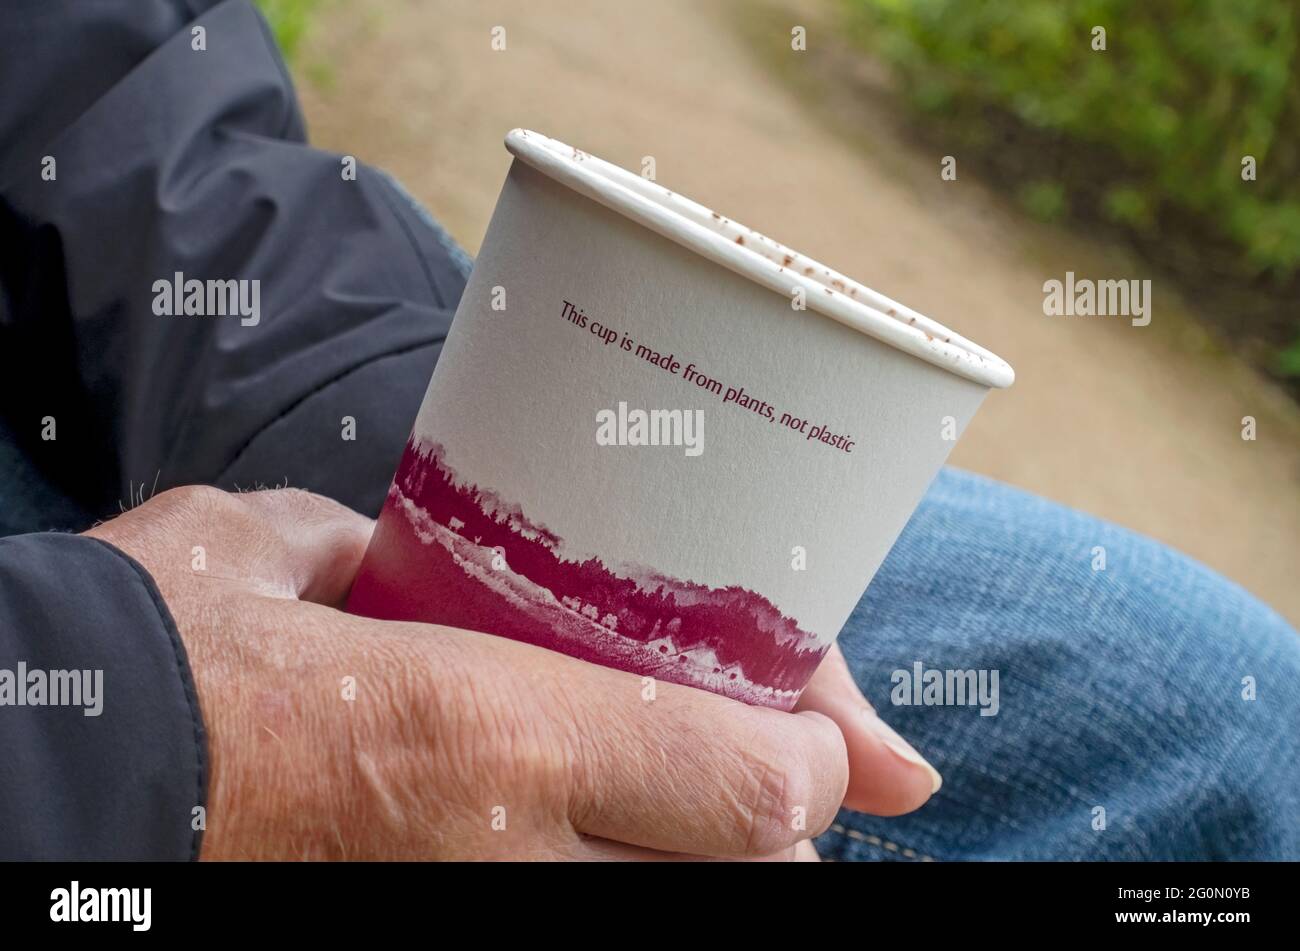 Close up of hand holding disposable drinking drink drinks cup made from plants England UK United Kingdom GB Great Britain Stock Photo